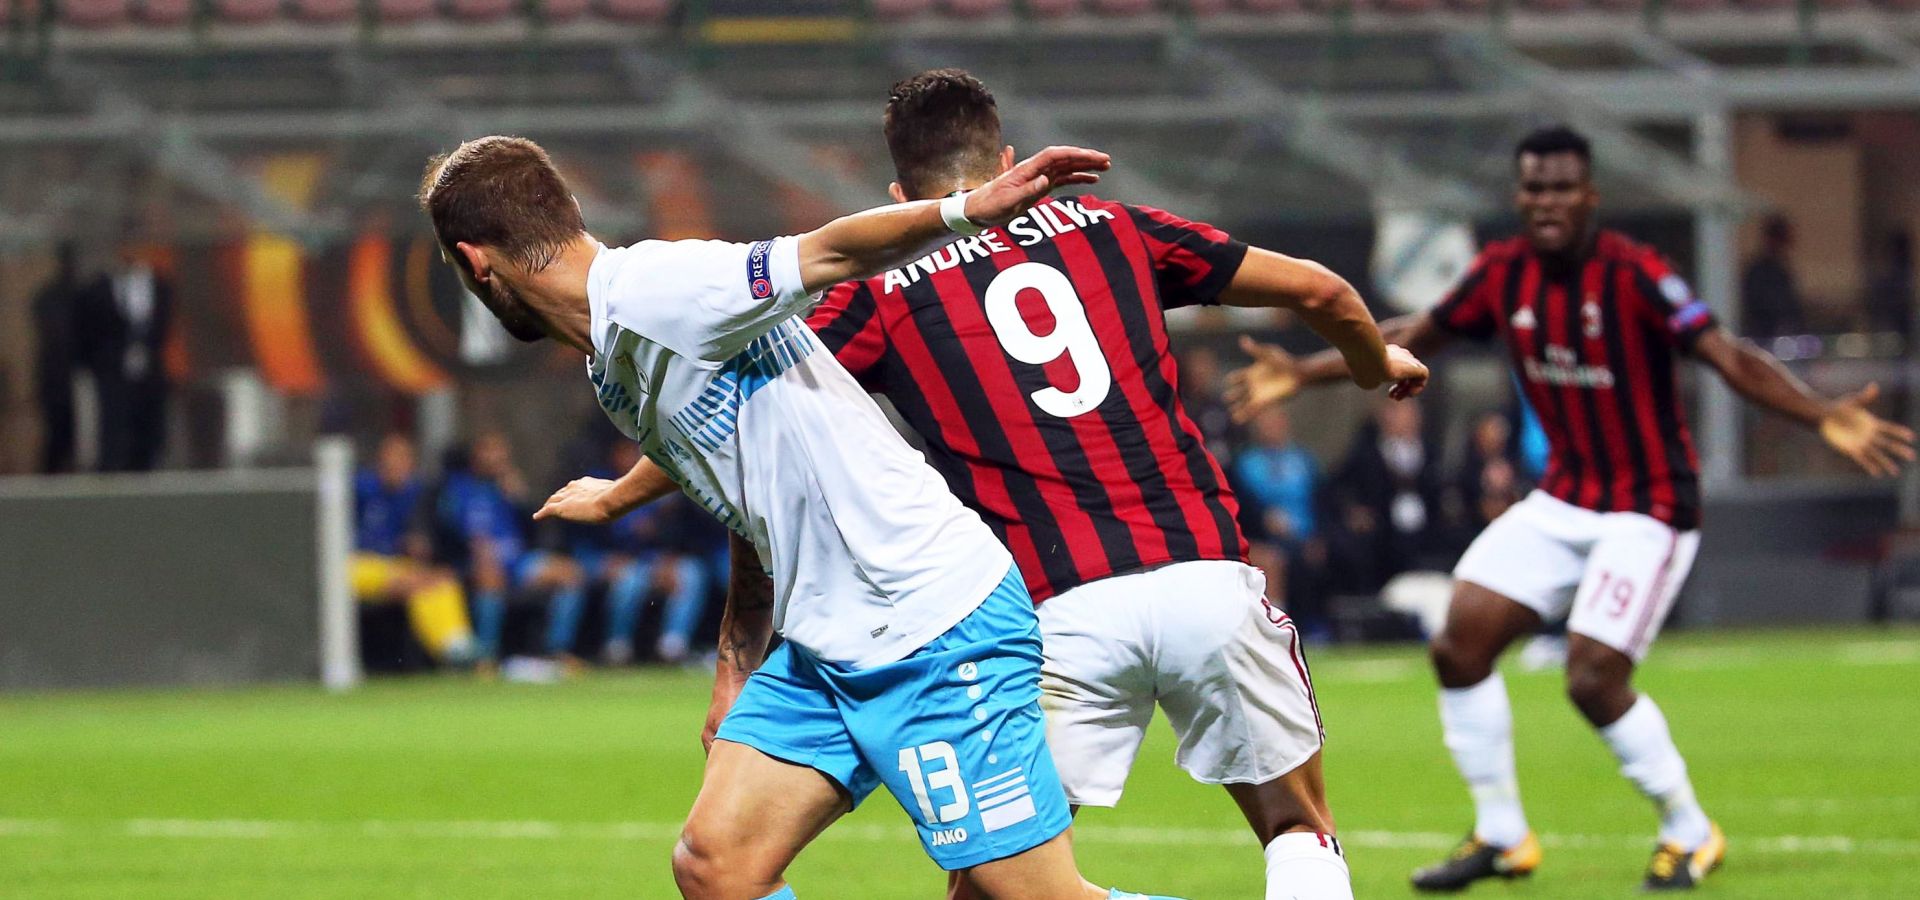 epa06233074 Milan's forward Andre Silva (C) is on the way to score the 1-0 lead next to Rijeka's defender Dario Zuparic (L) during the UEFA Europa League Group D soccer match between AC Milan and HNK Rijeka at Giuseppe Meazza stadium in Milan, Italy, 28 September 2017.  EPA/MATTEO BAZZI